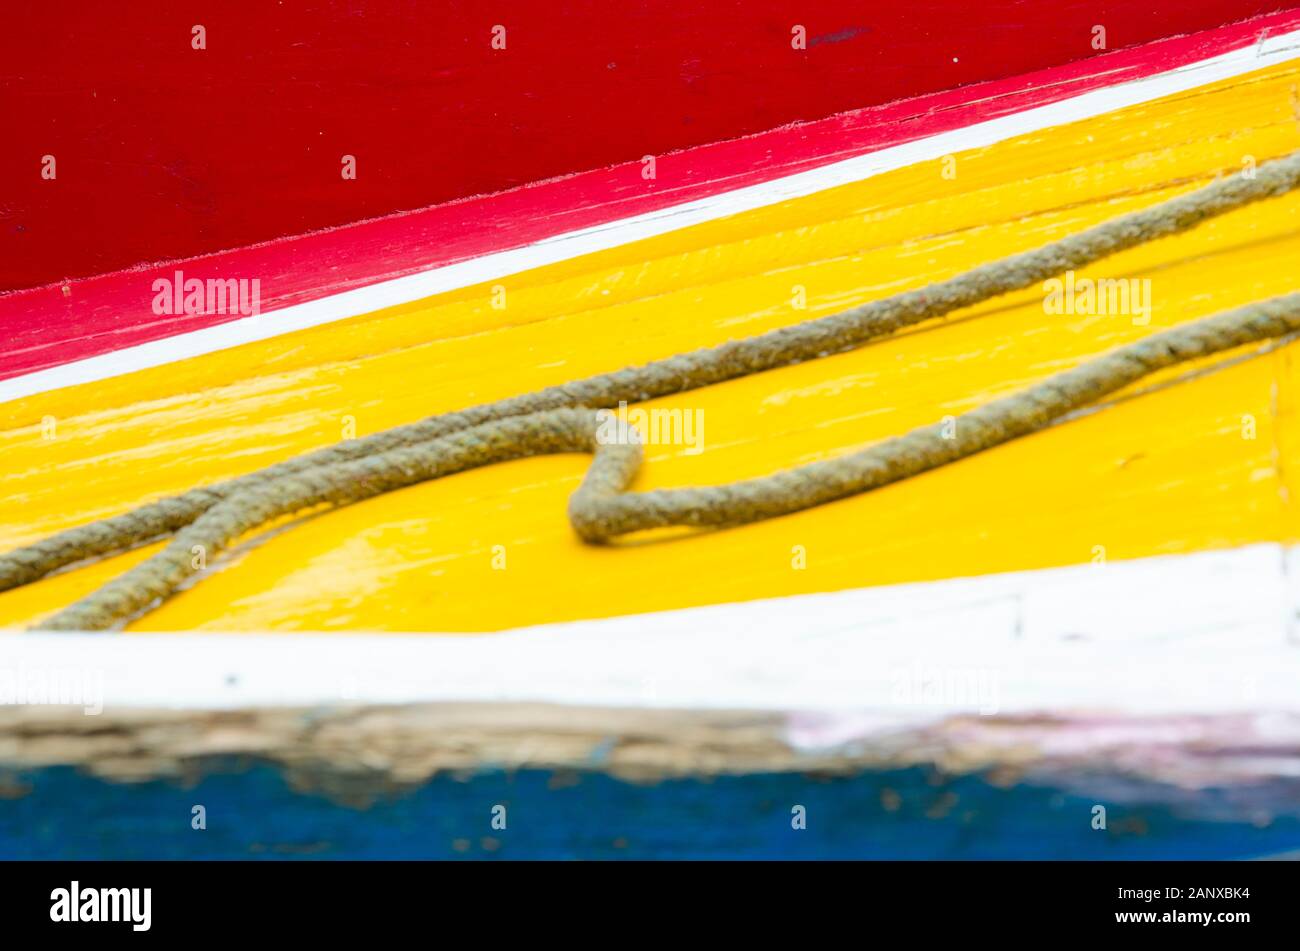 Colorful detail of a Trajinera boat in Xochimilco, Mexico, yellow, red, white and blue Stock Photo